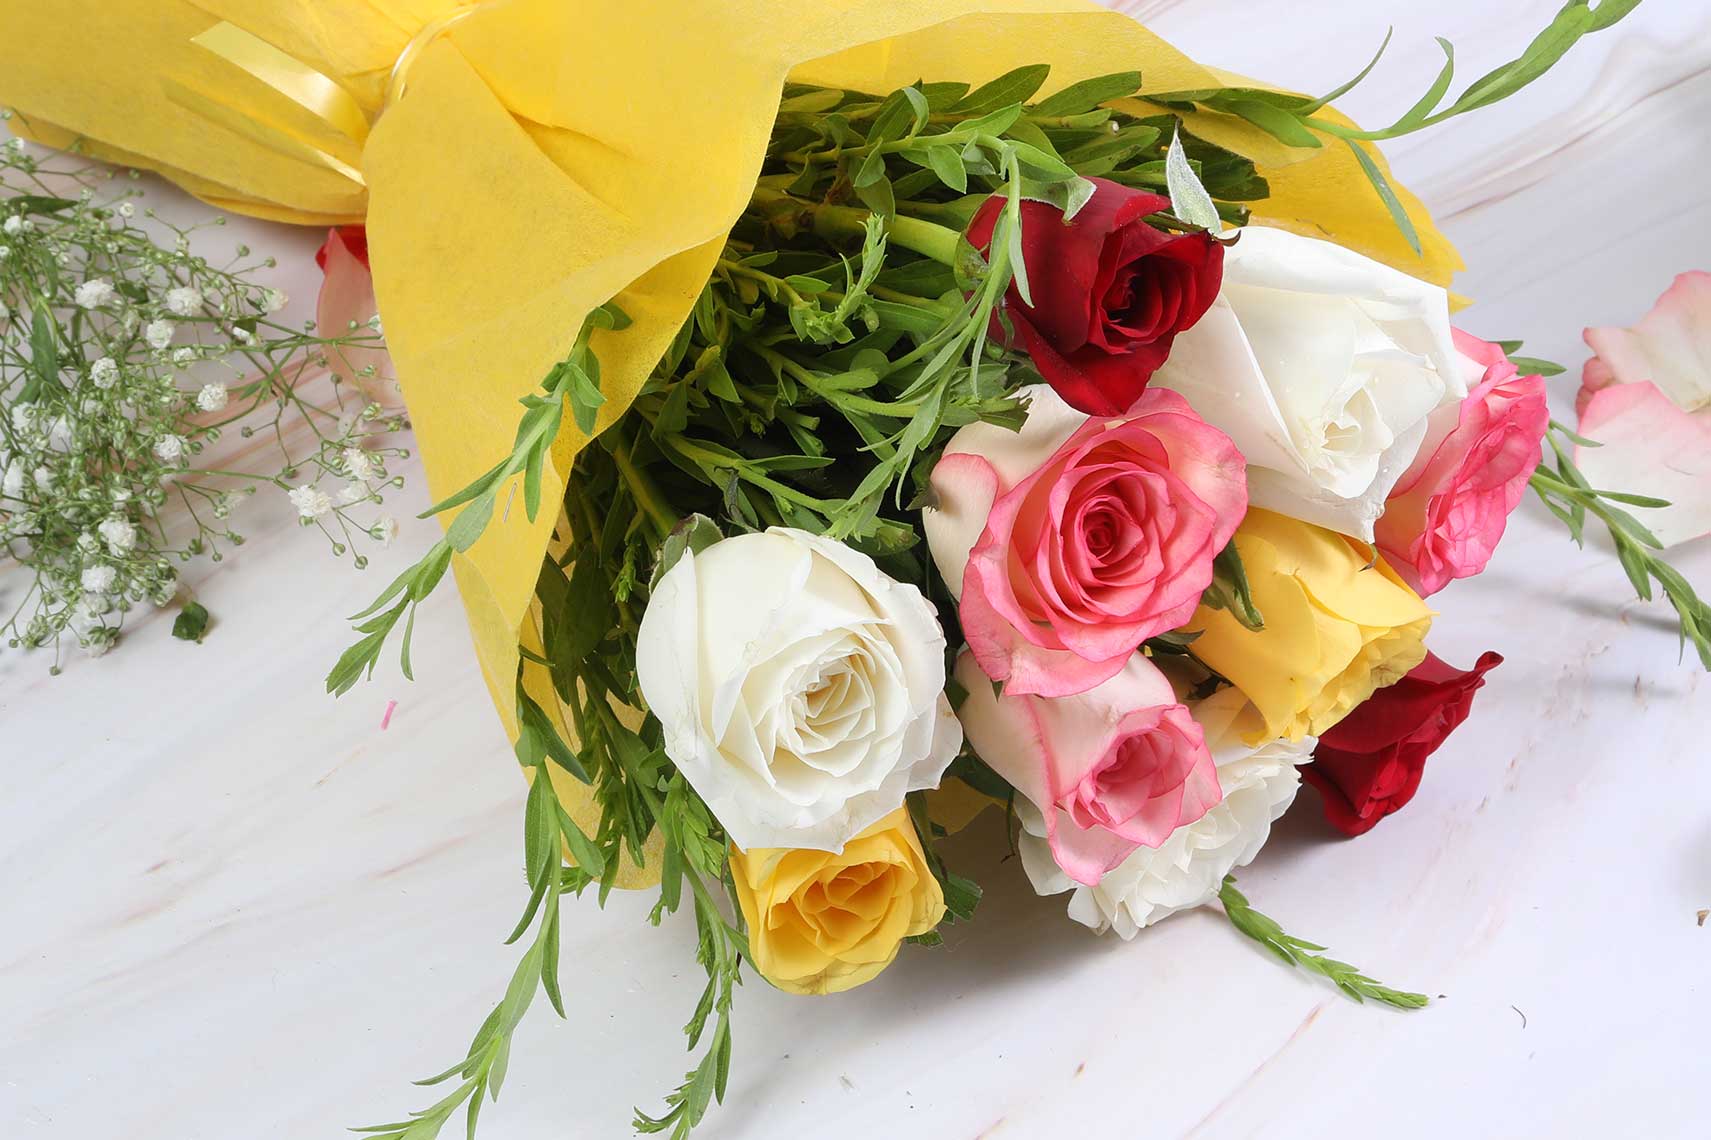 Bunch of 10 Mixed Roses - Buy Online Order Now